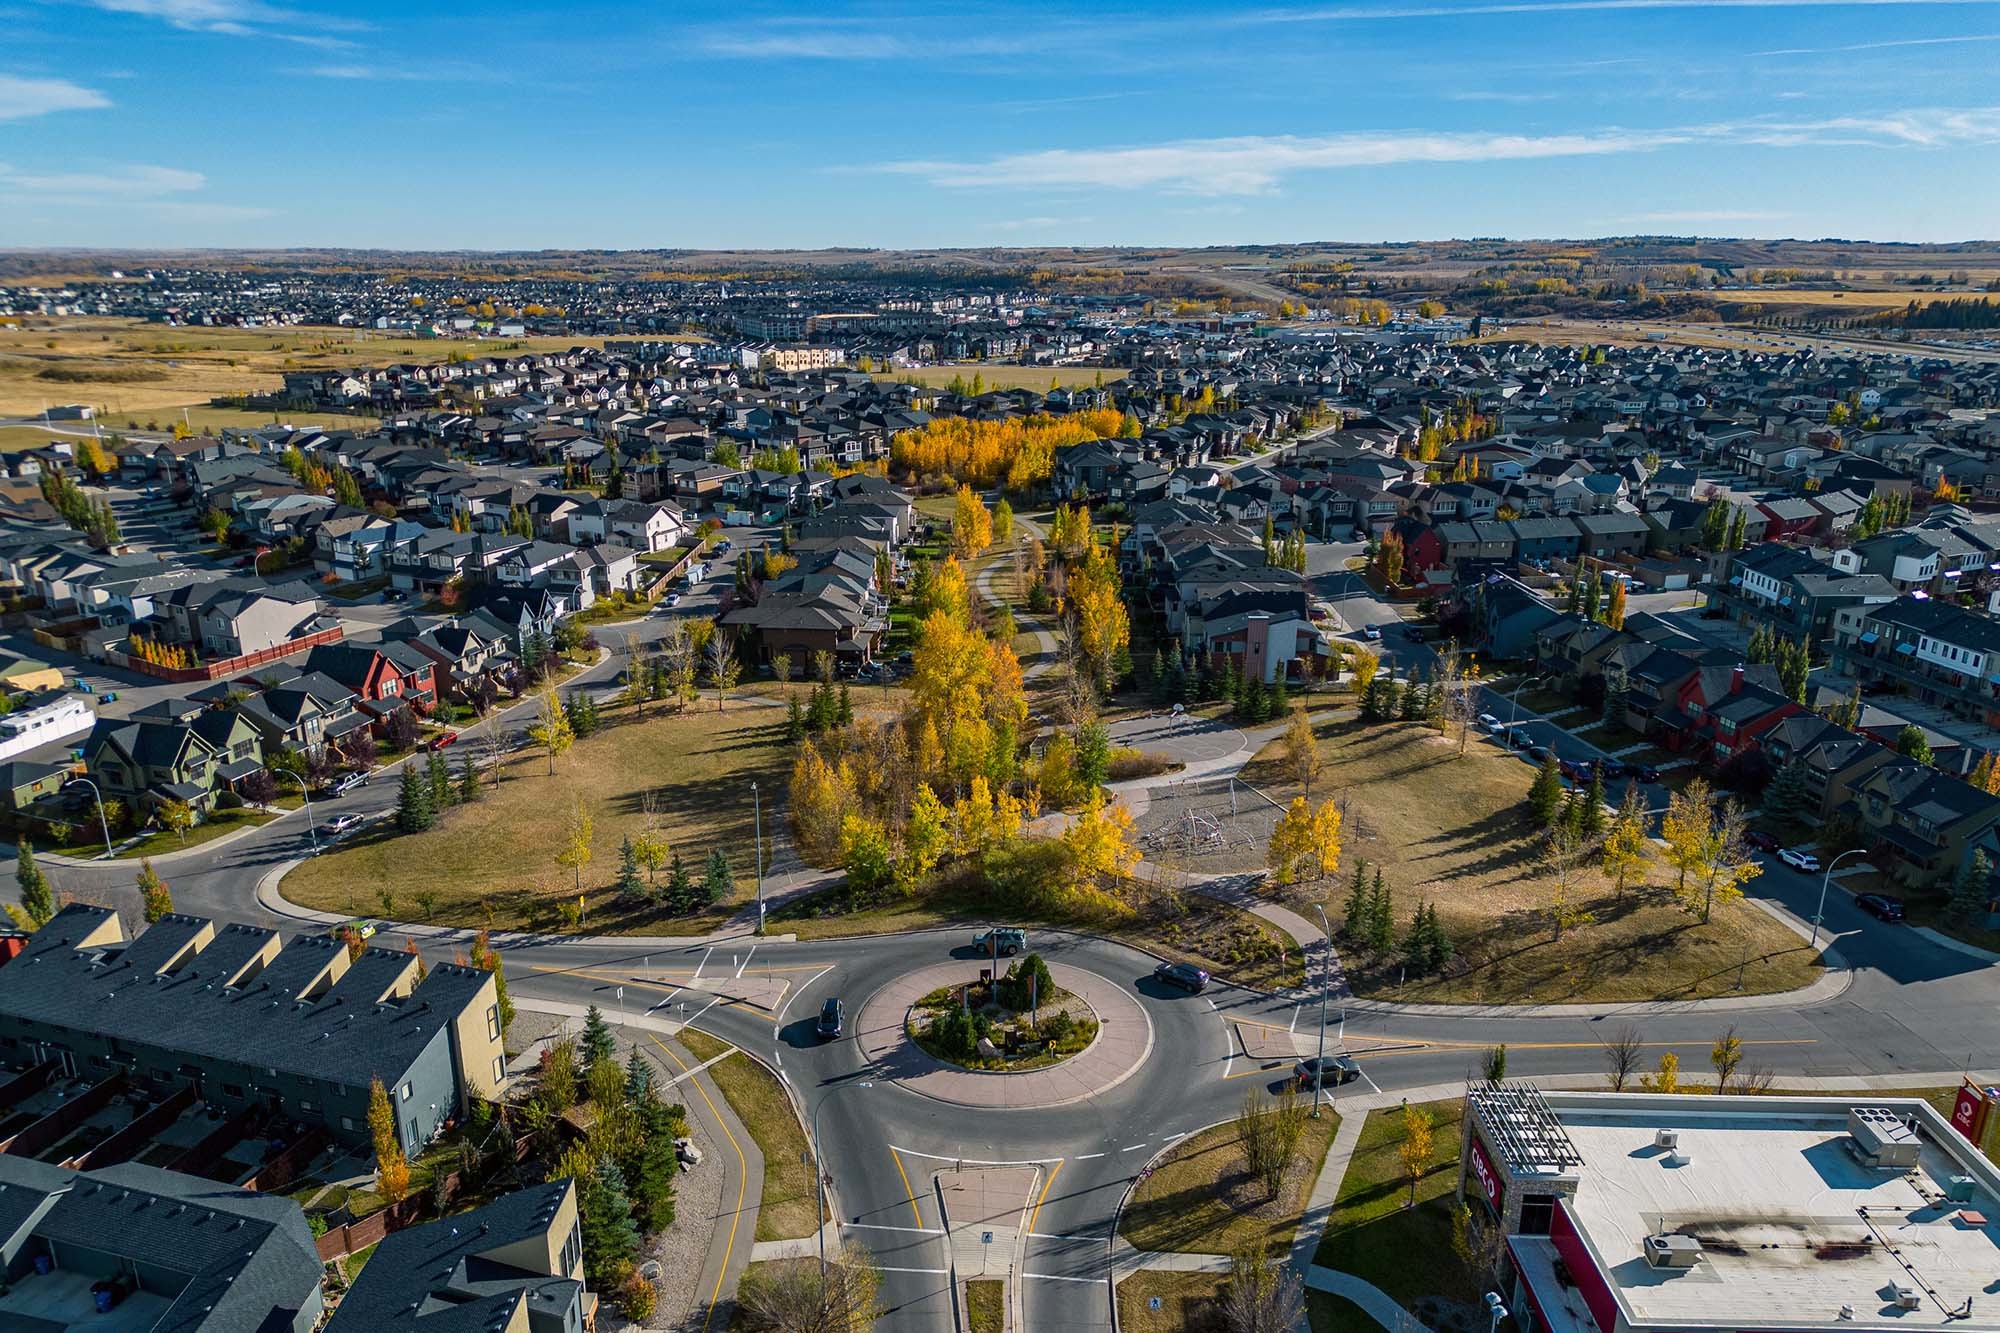 An south-facing aerial photograph of houses, streets, and tall trees in the community of Walden in Calgary, Alberta, Canada taken above the intersection of Walden Gate SE and Walden Dr SE.